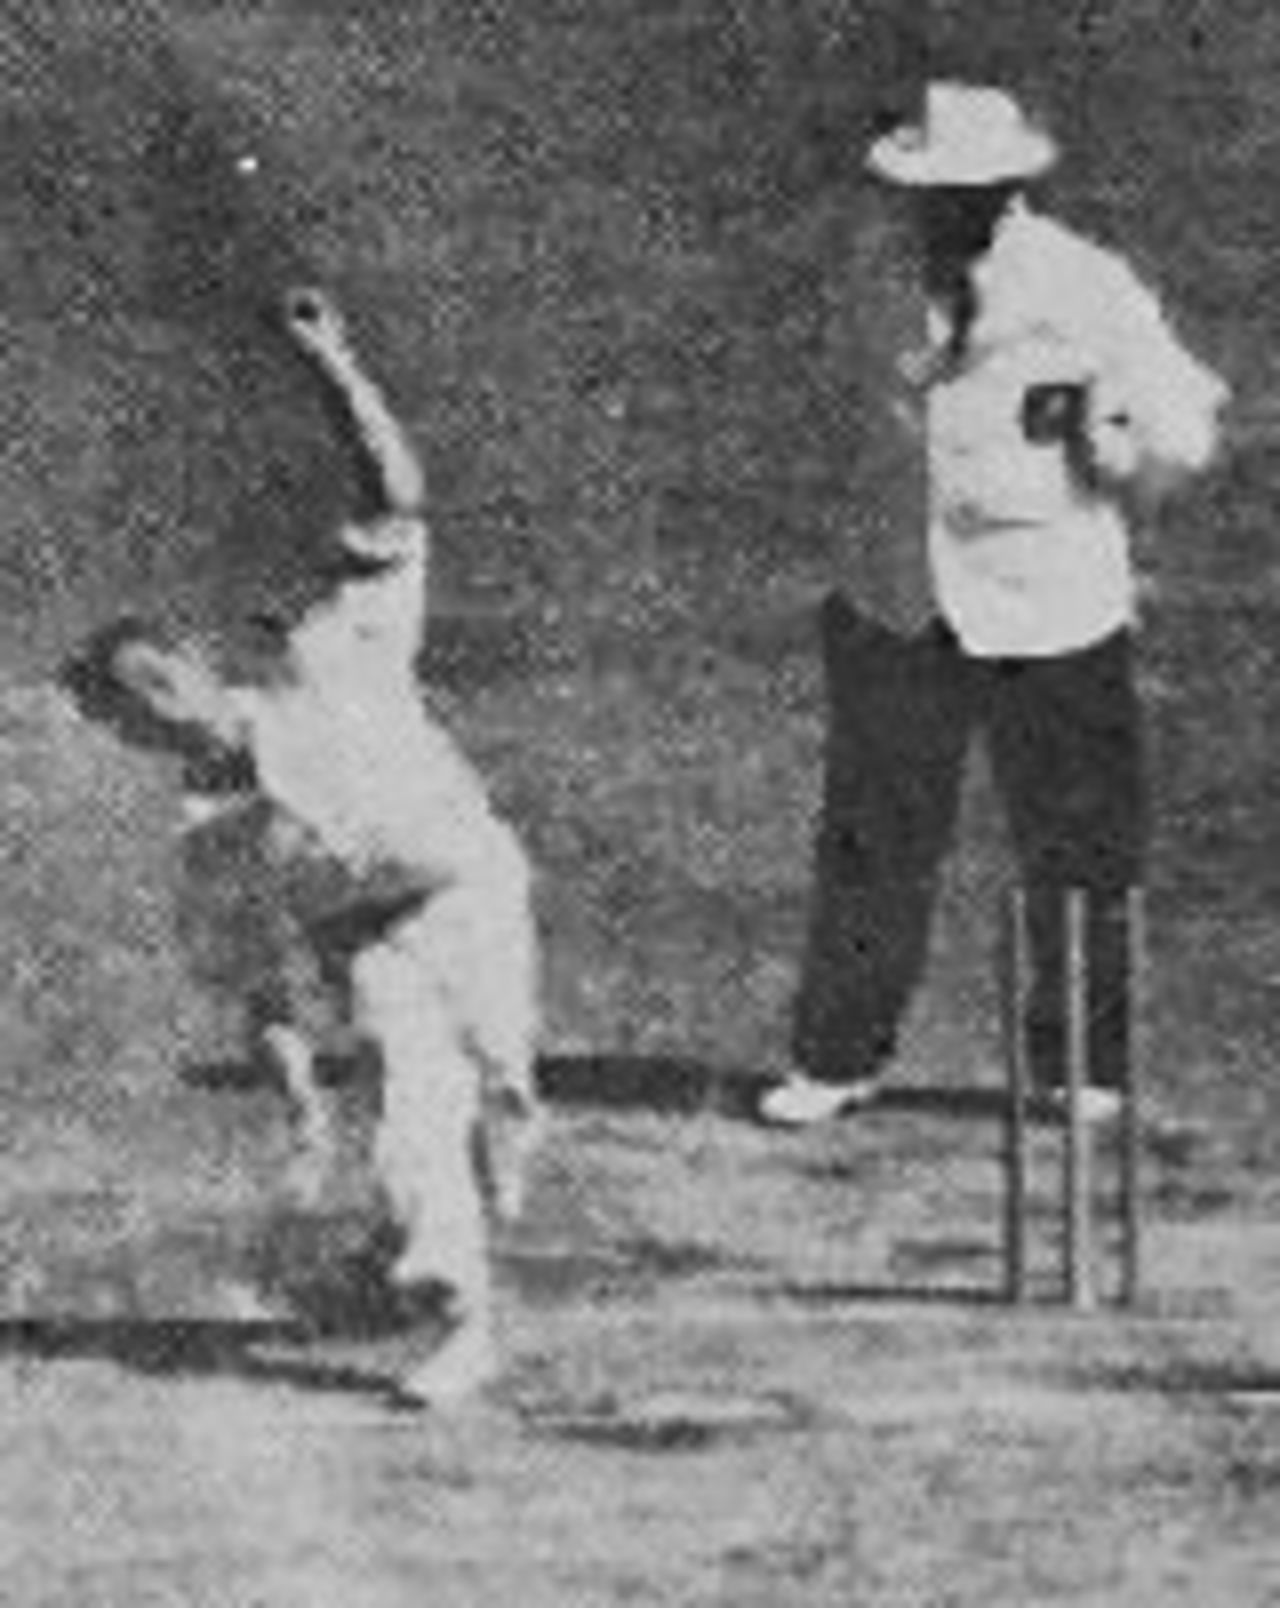 Ian Meckiff bowling, Australia v England, Melbourne, 1958-59 (throwing controversy)